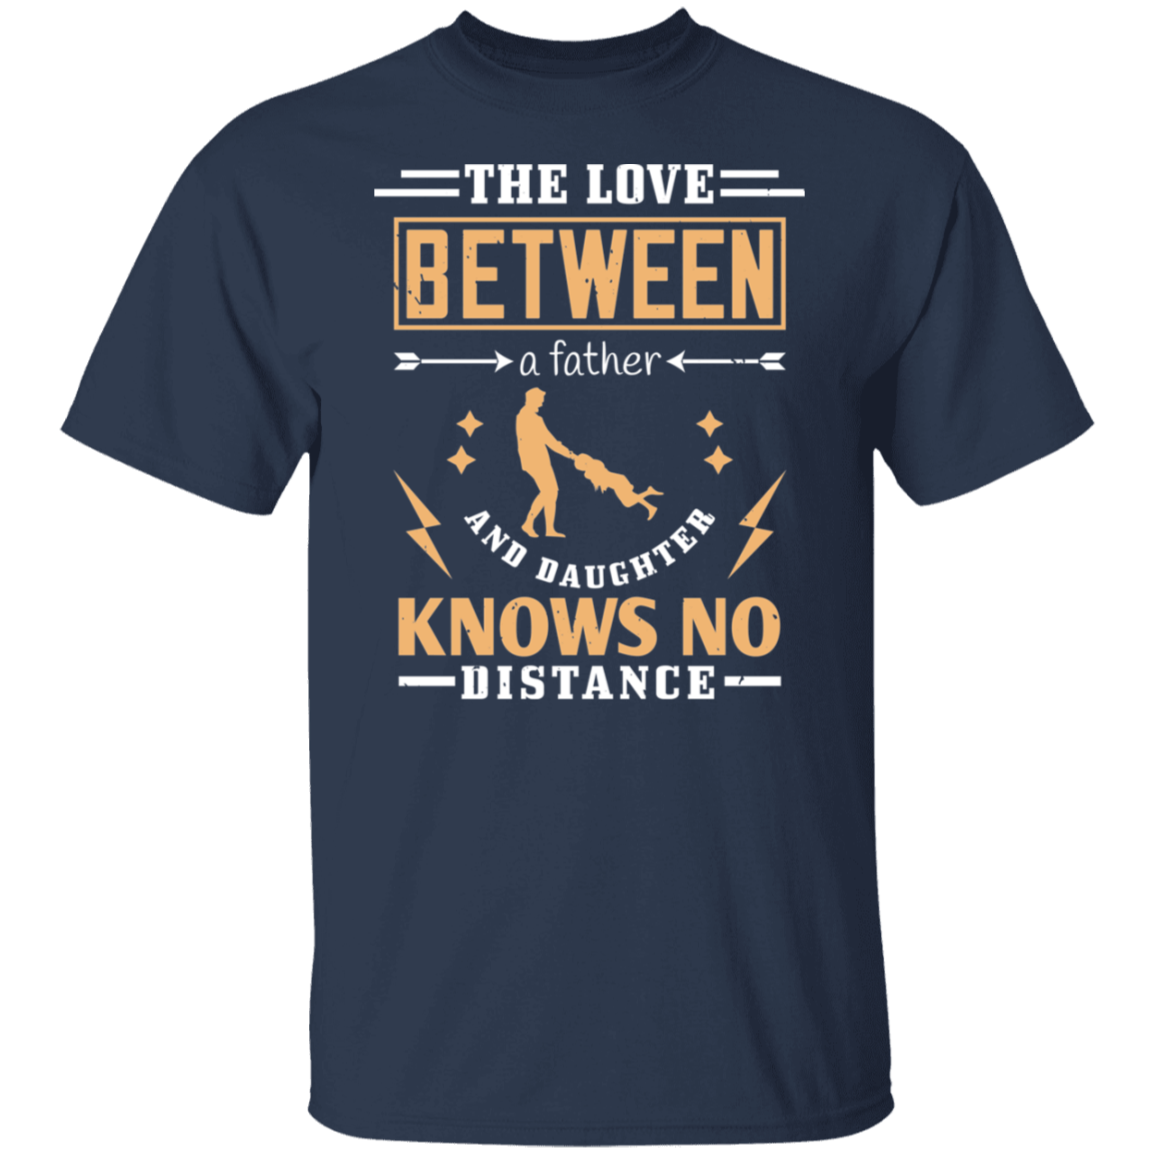 The Love Between A Father And Daughter Knows No Distance - Father's Day Tee Junk Drawer Tees